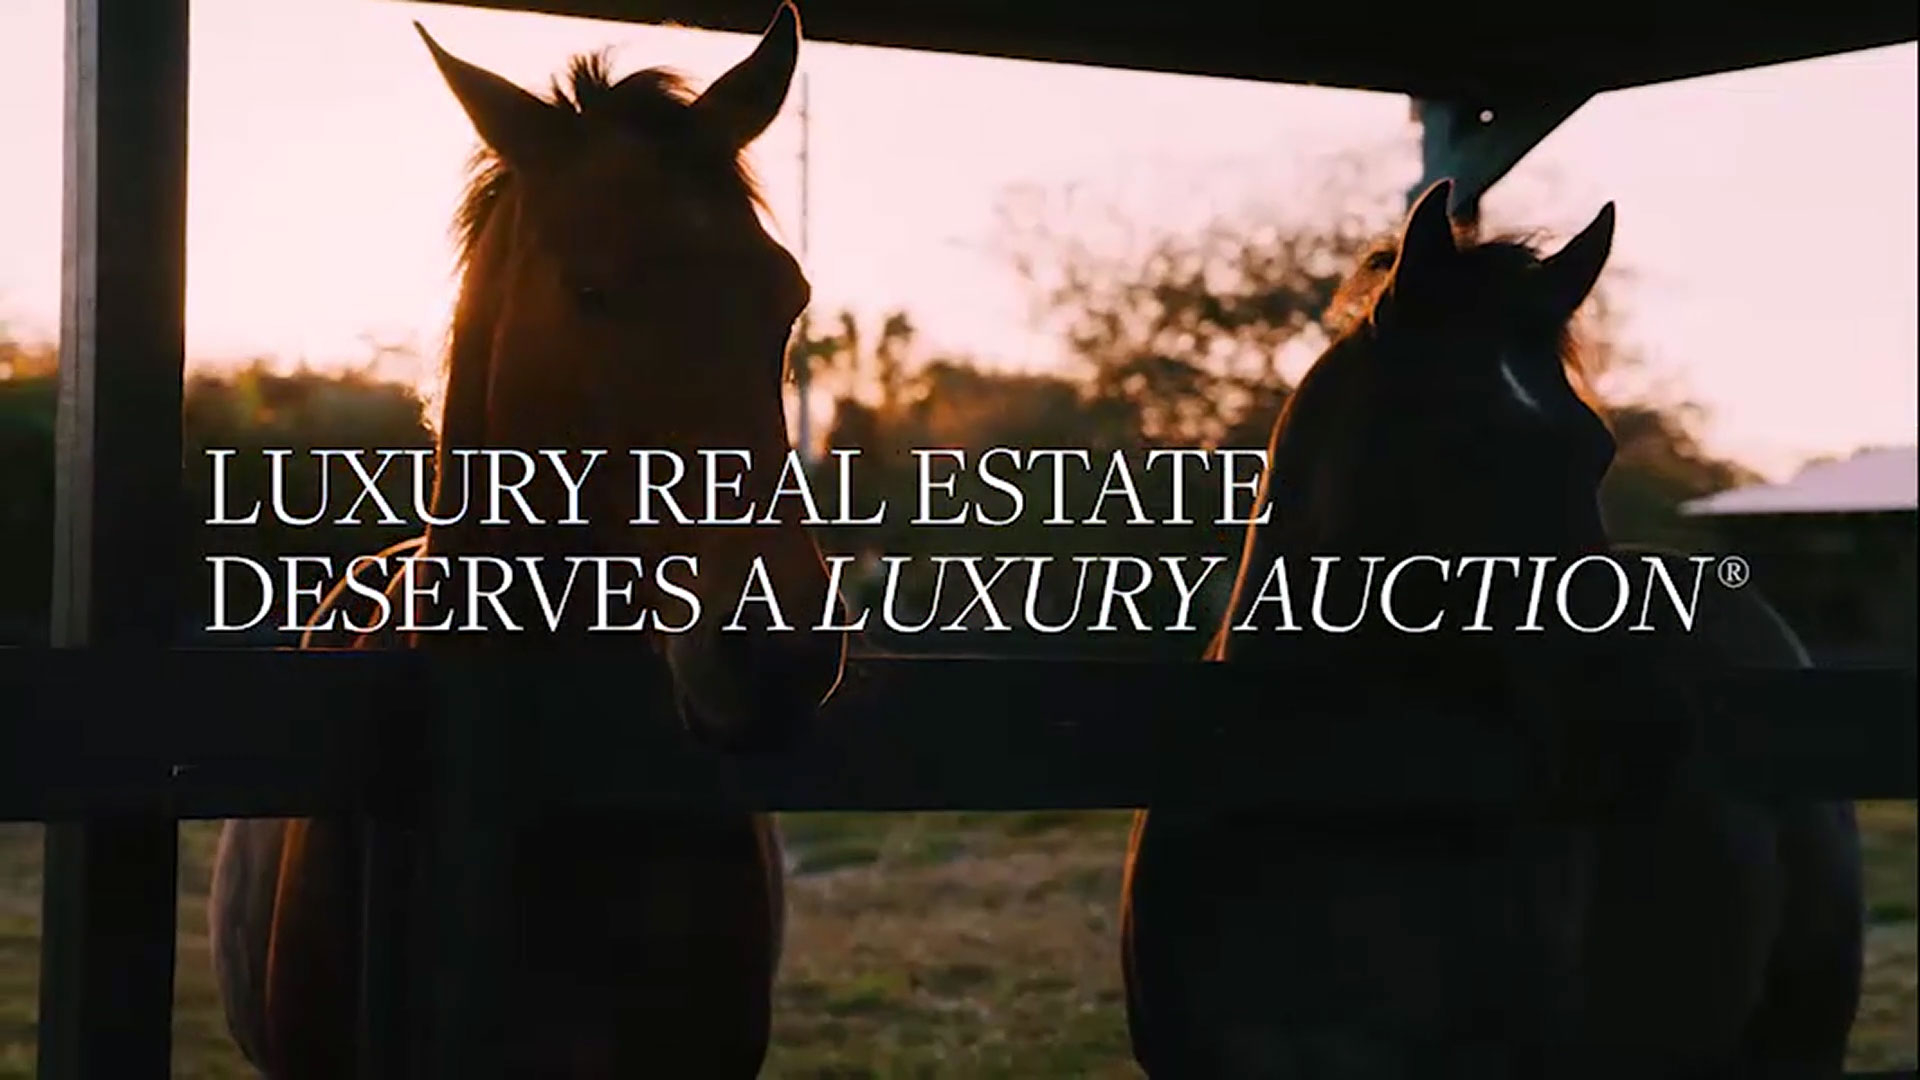 On March 9, 2024, these two, 5-acre parcels in the world-famous equestrian village of Wellington, Florida will be sold to the highest bidder at a luxury auction® without reserve. Together, the contiguous parcels create a 10.26-acre horse farm that includes a 150-ft x 250-ft arena, round pen, 18 stalls, and 8 paddocks, in addition to a residence and guesthouse. The parcels will be available separately or as one unit of sale. Platinum Luxury Auctions is exclusively managing the sale on behalf of the seller. WellingtonLuxuryAuction.com.